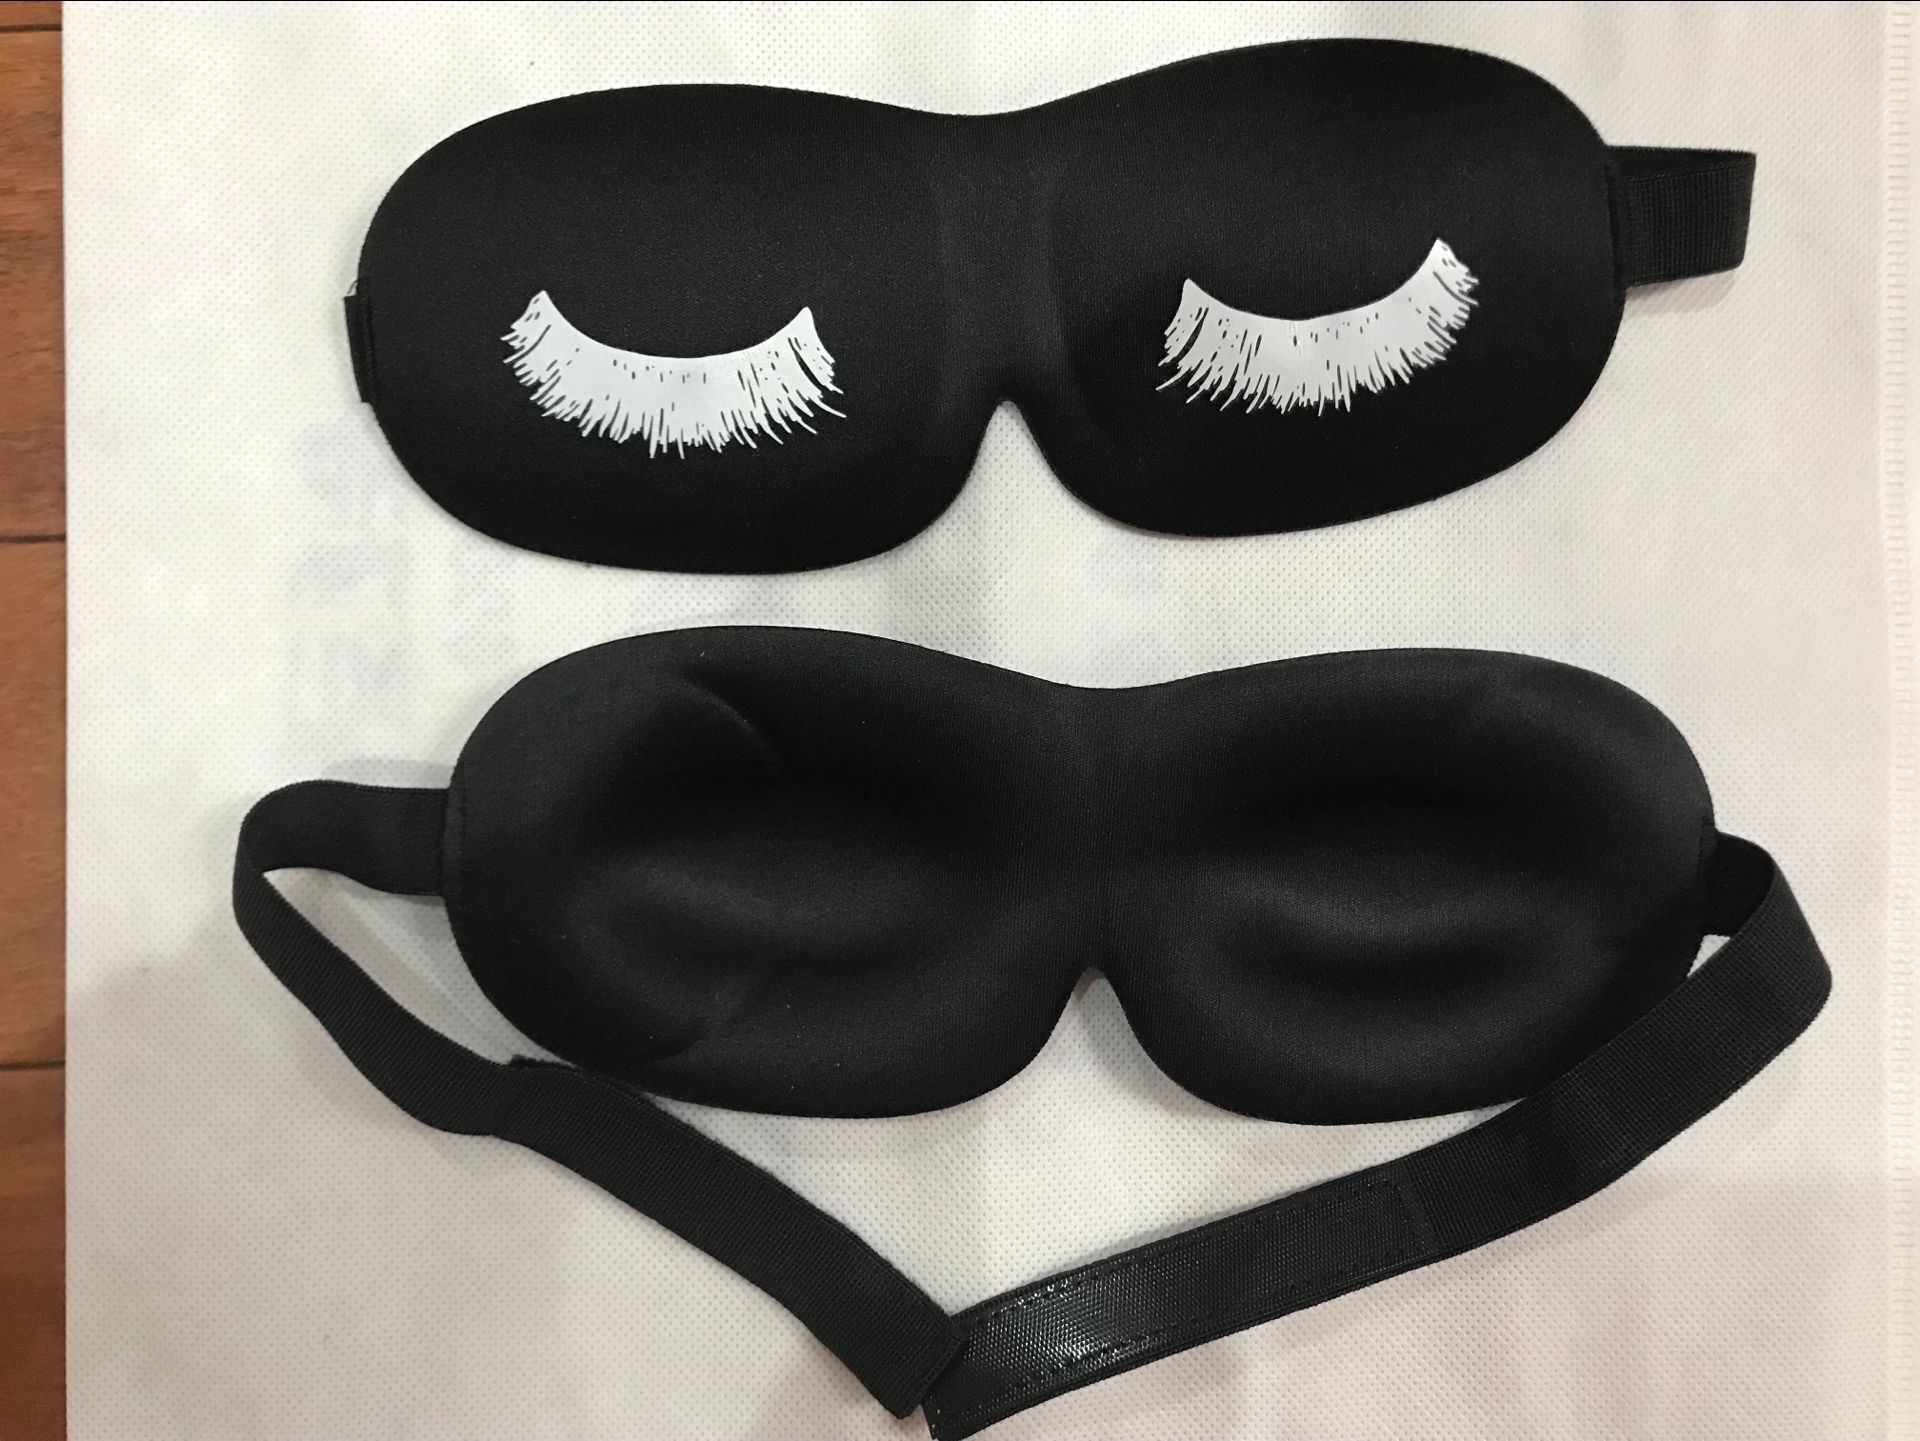 Sleep Mask for Woman, Eye Mask for Sleeping, Patented Design 100% Blackout Eye Cover, 3D Contoured Comfortable Sleeping Mask & Blindfold от DHgate WW